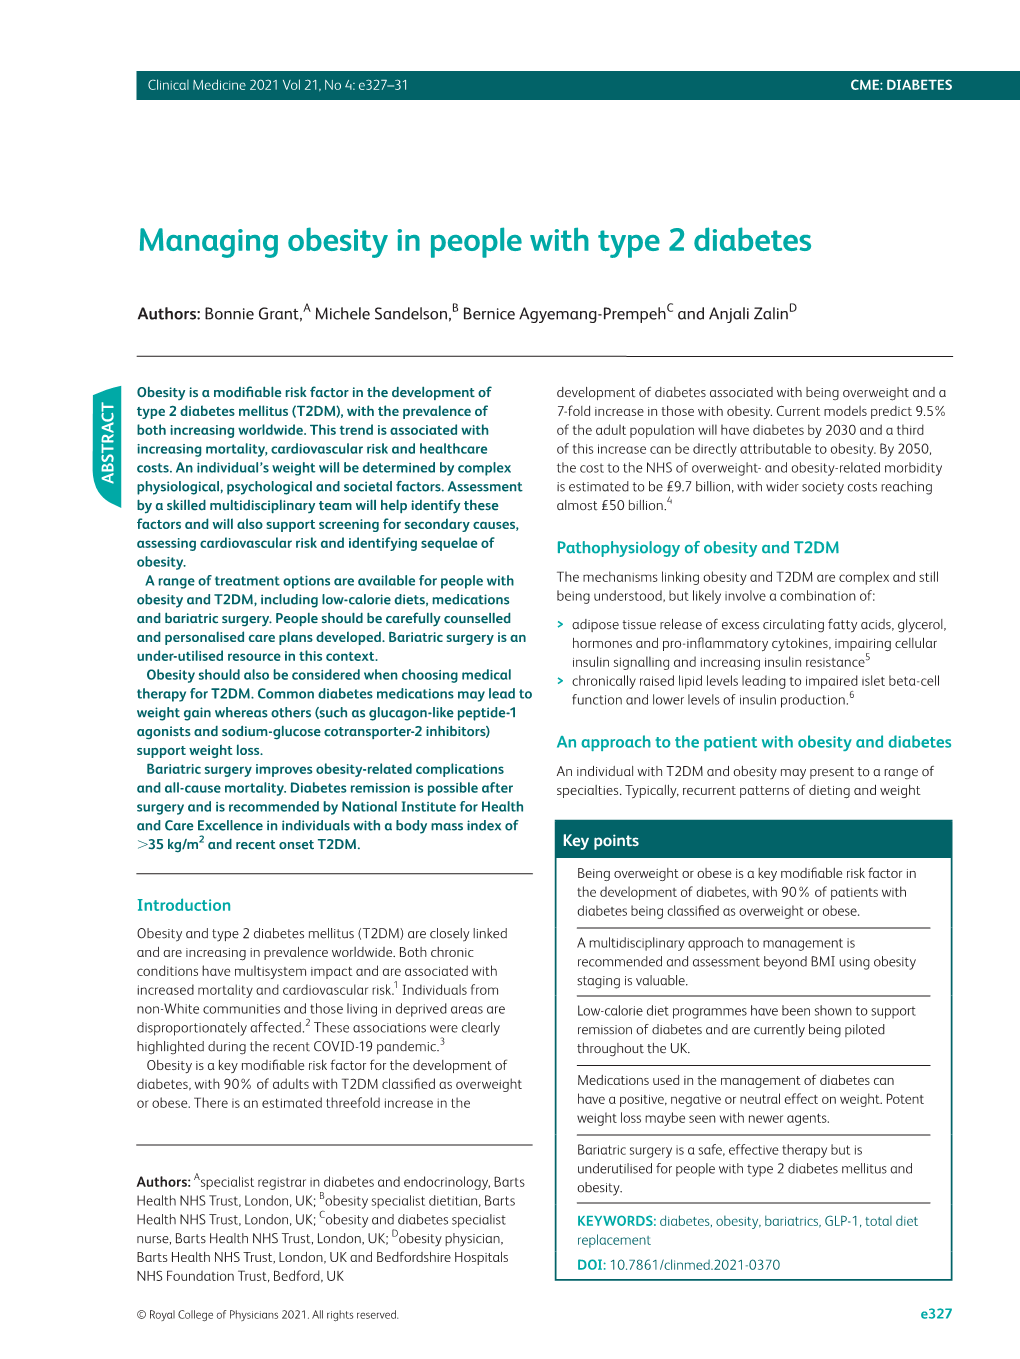 Managing Obesity in People with Type 2 Diabetes